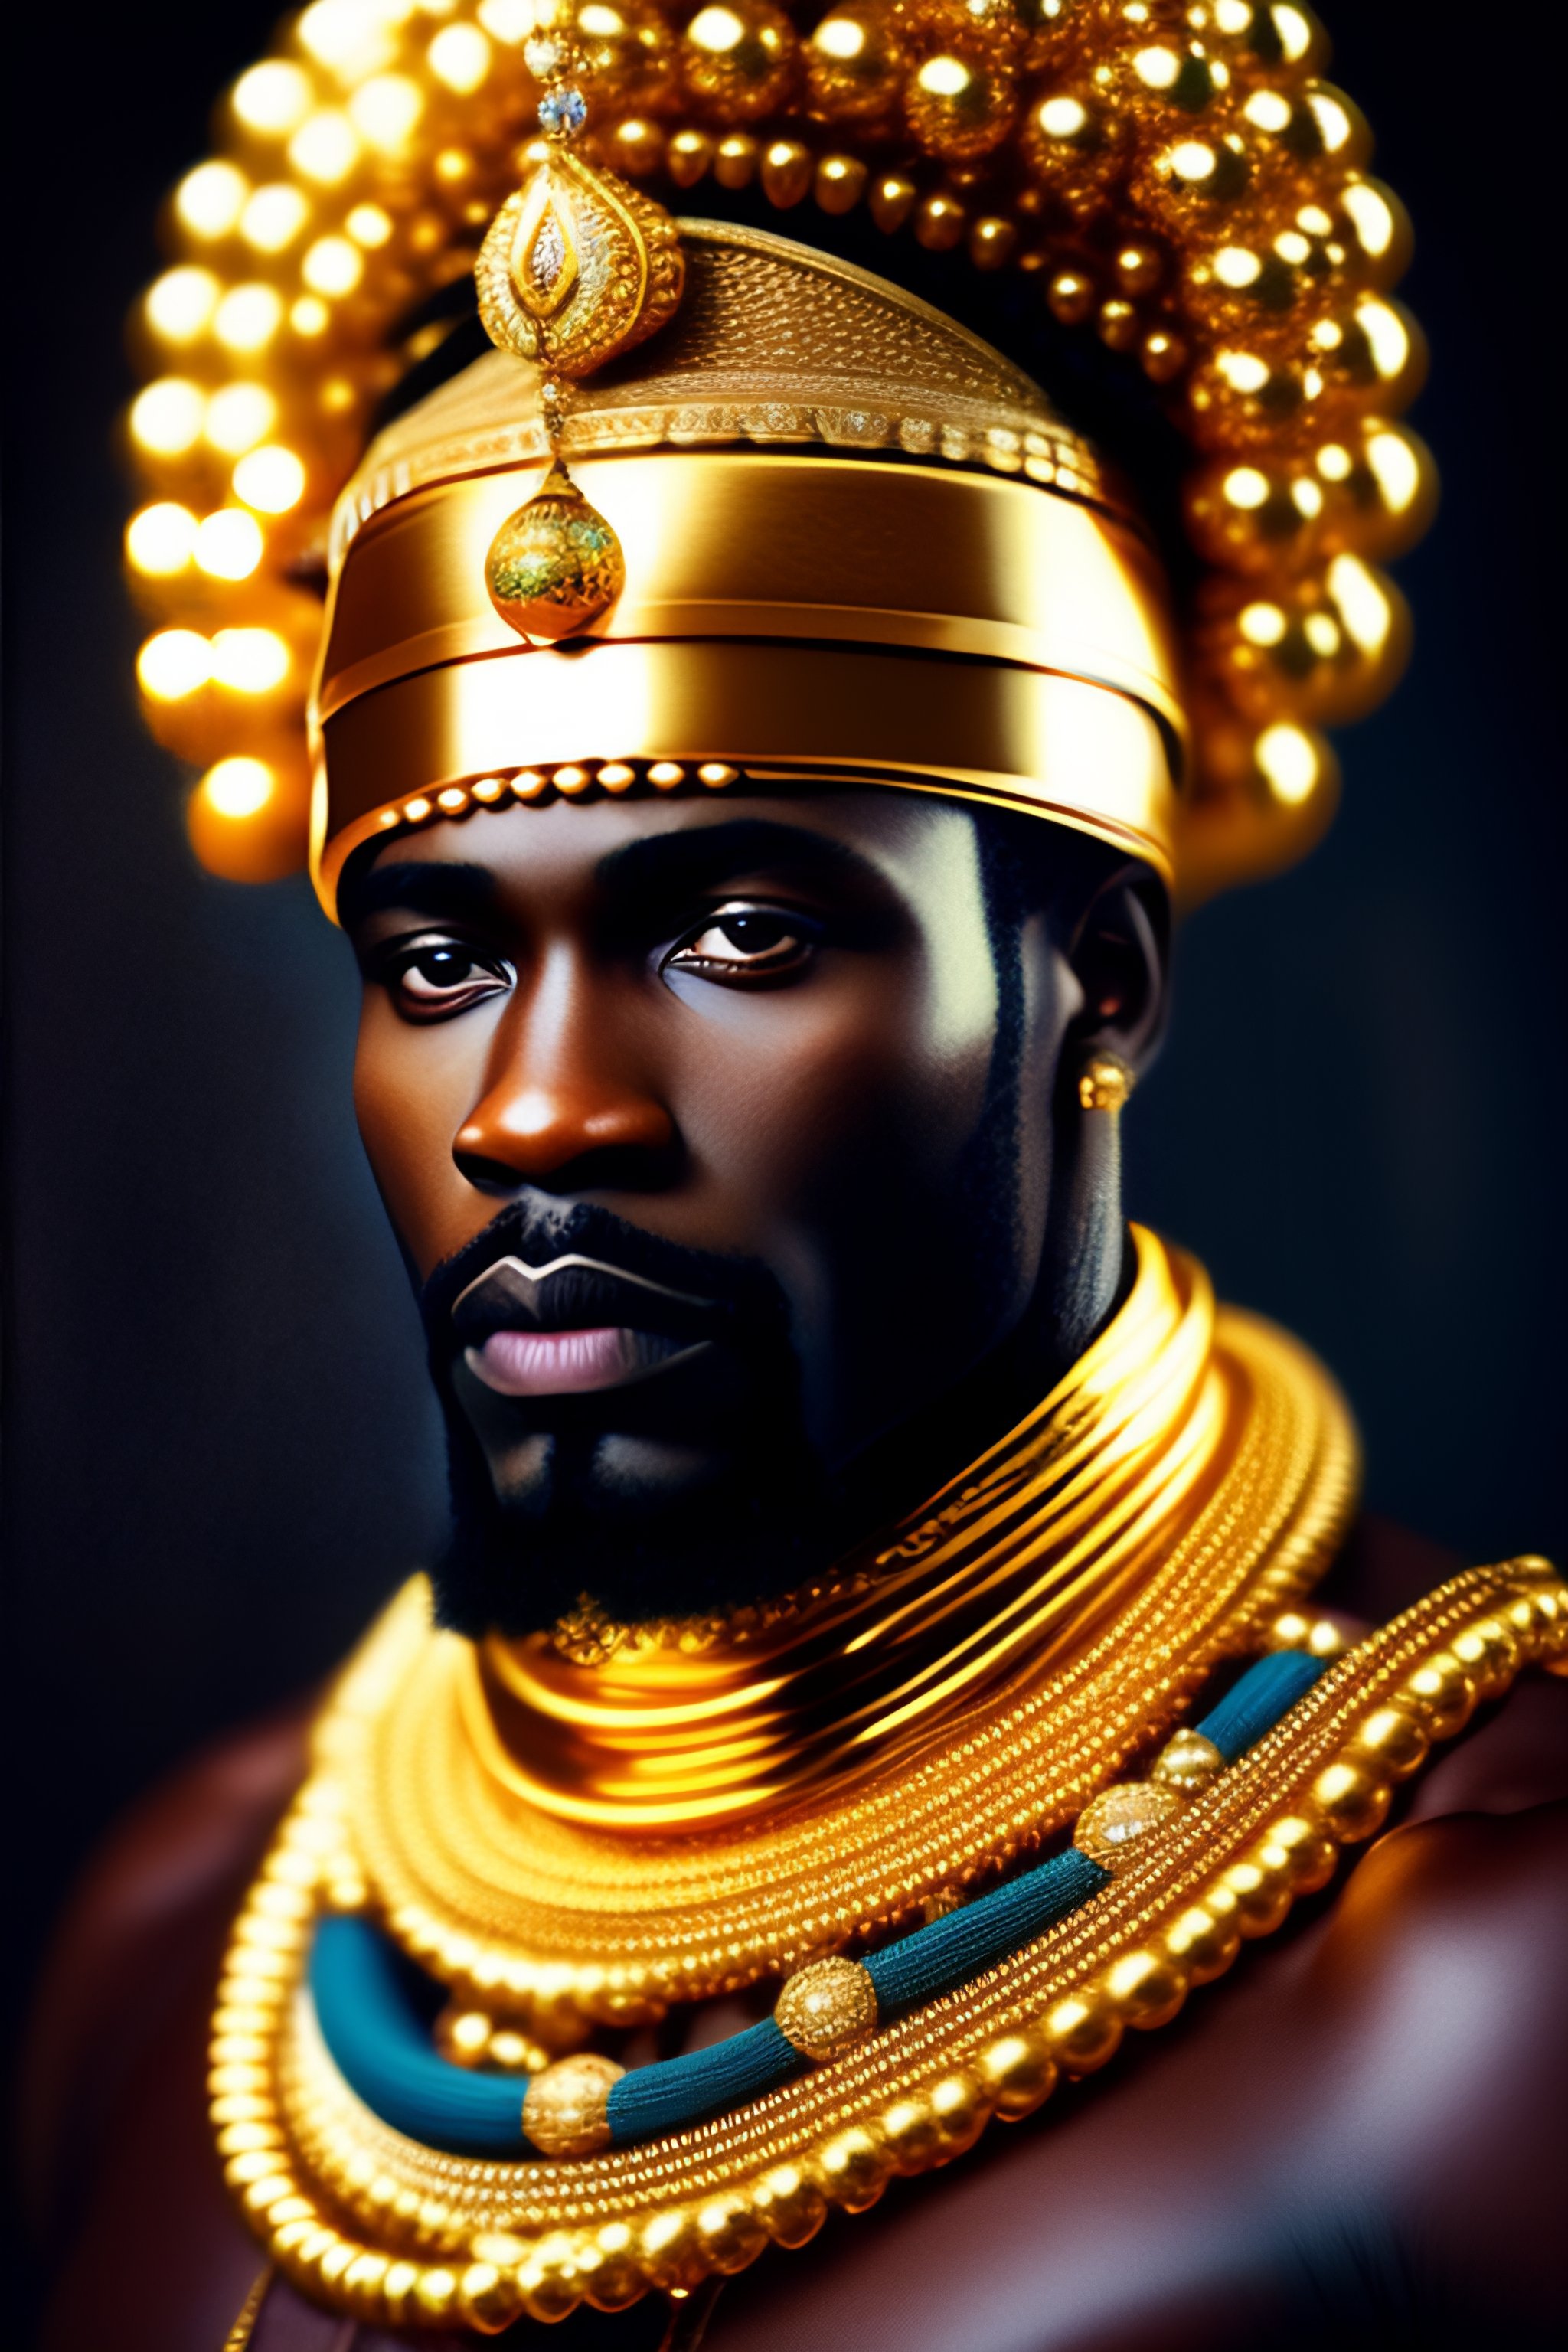 Lexica - African King, wearing gold ornaments, looking into camera ...